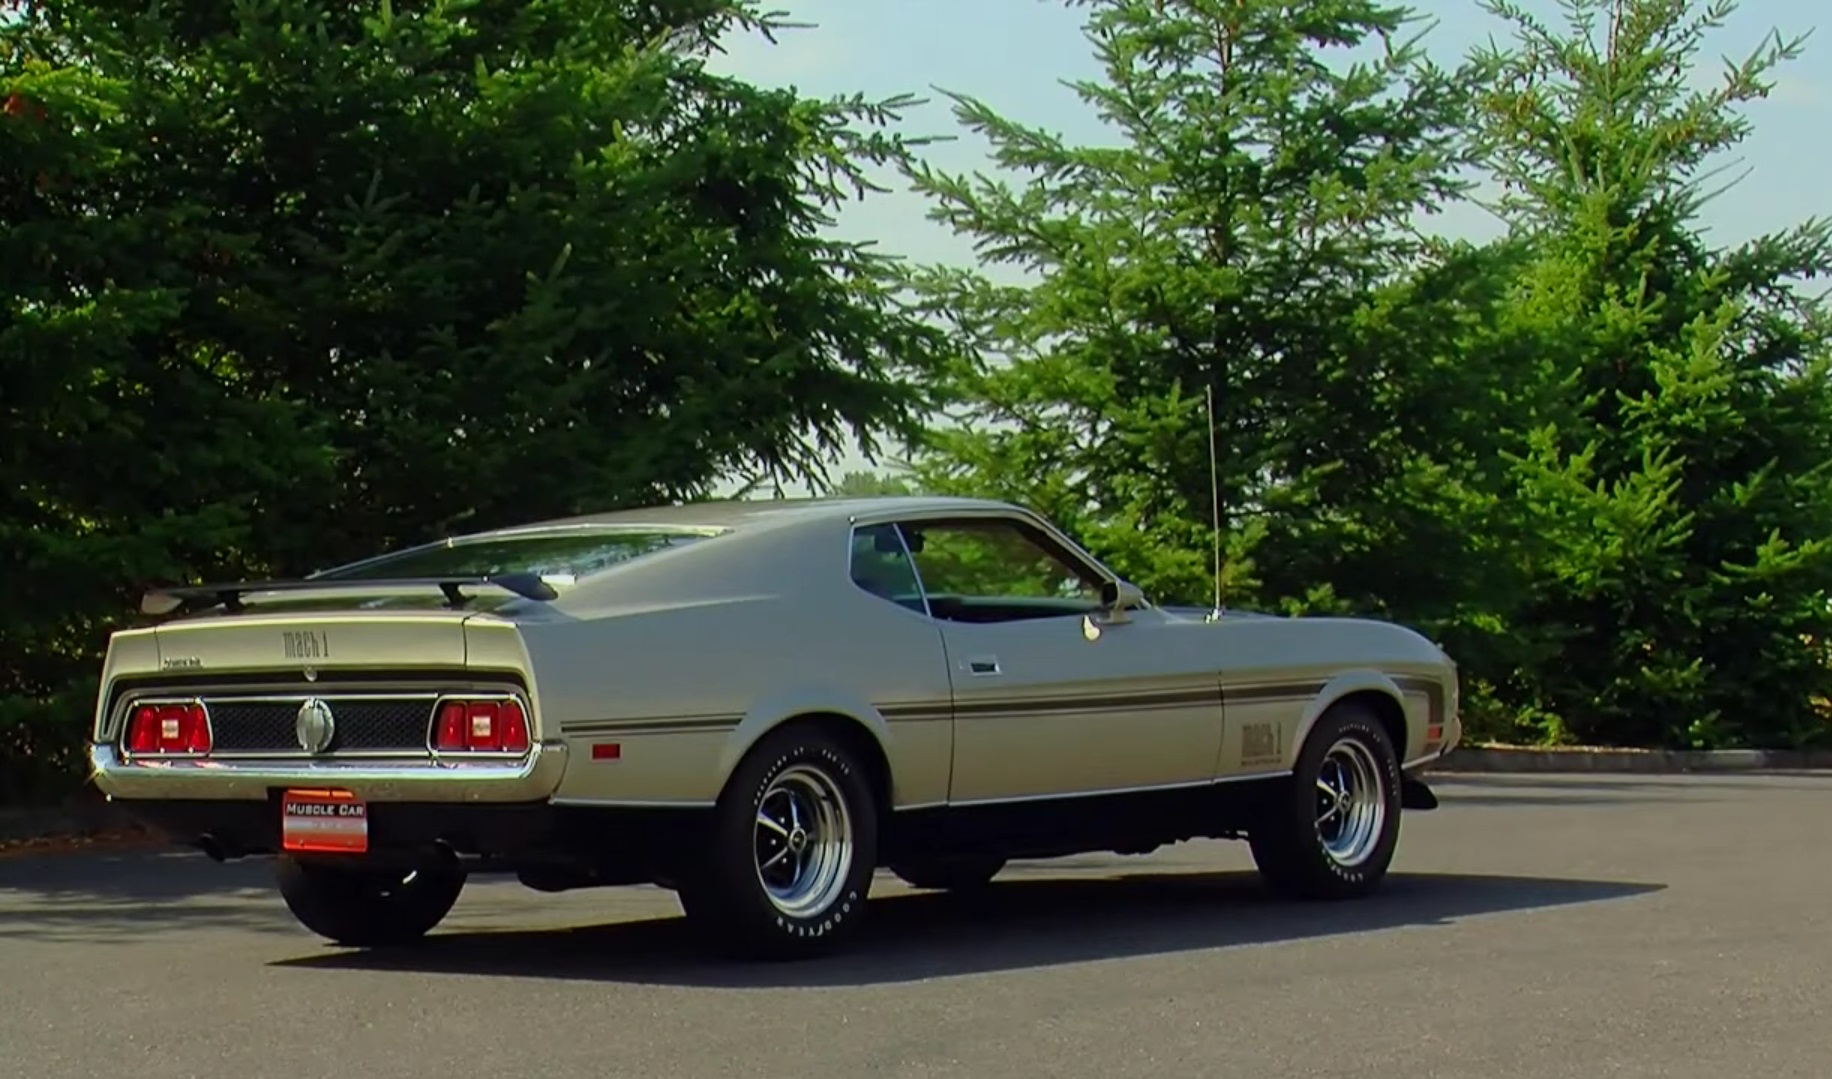 Video: 1971 Ford Mustang Mach 1 429 Muscle Car